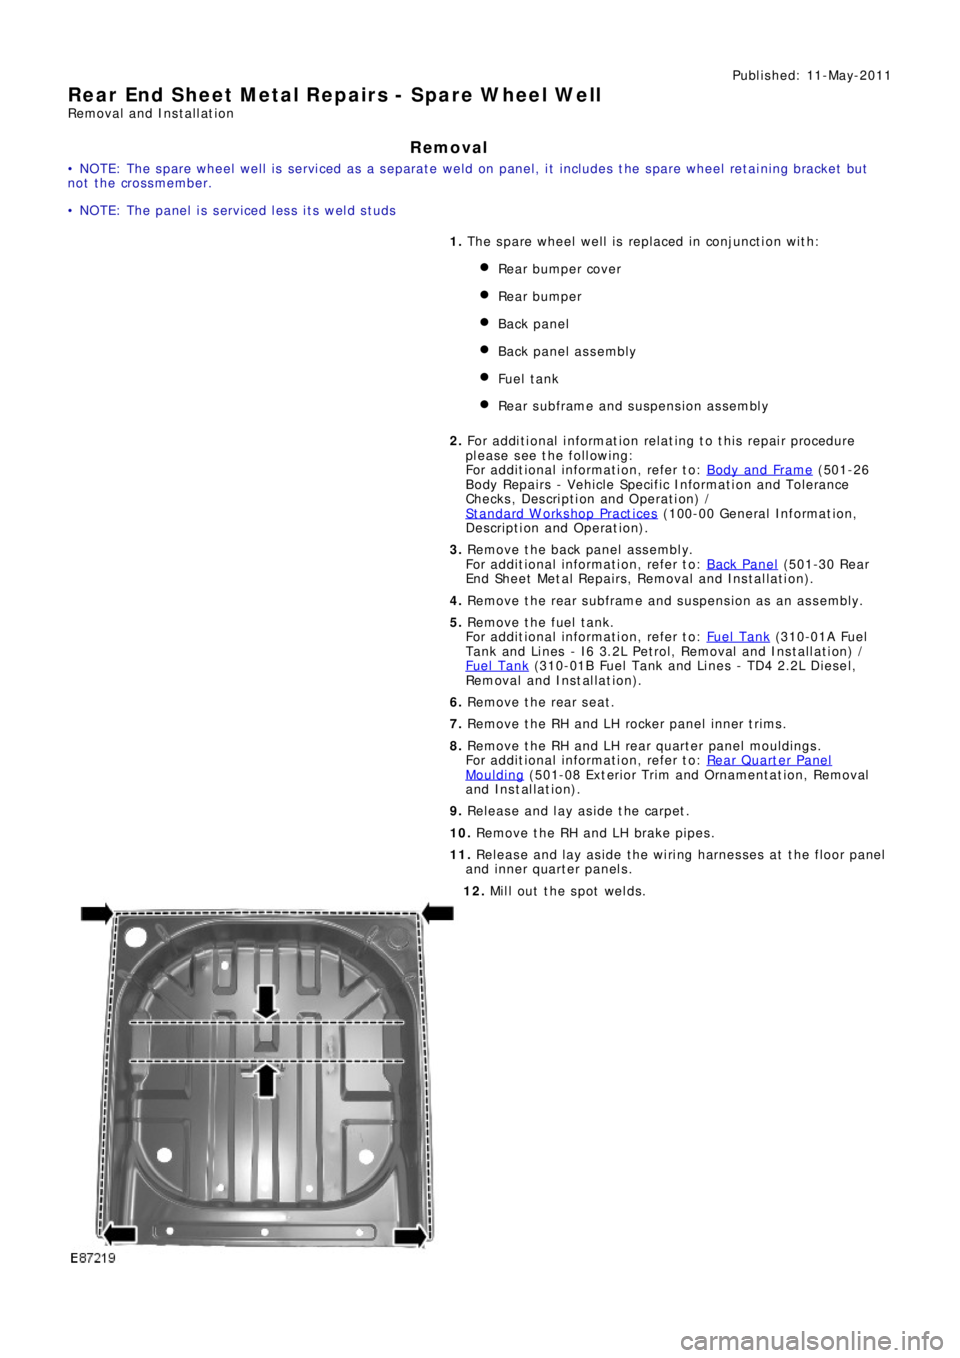 LAND ROVER FRELANDER 2 2006  Repair Manual Publ is hed: 11-May-2011
Rear End Sheet Metal Repairs - Spare Wheel Well
Removal and Installation
Removal
• NOTE: The spare wheel well is serviced as a separate weld on panel, it includes the spare 